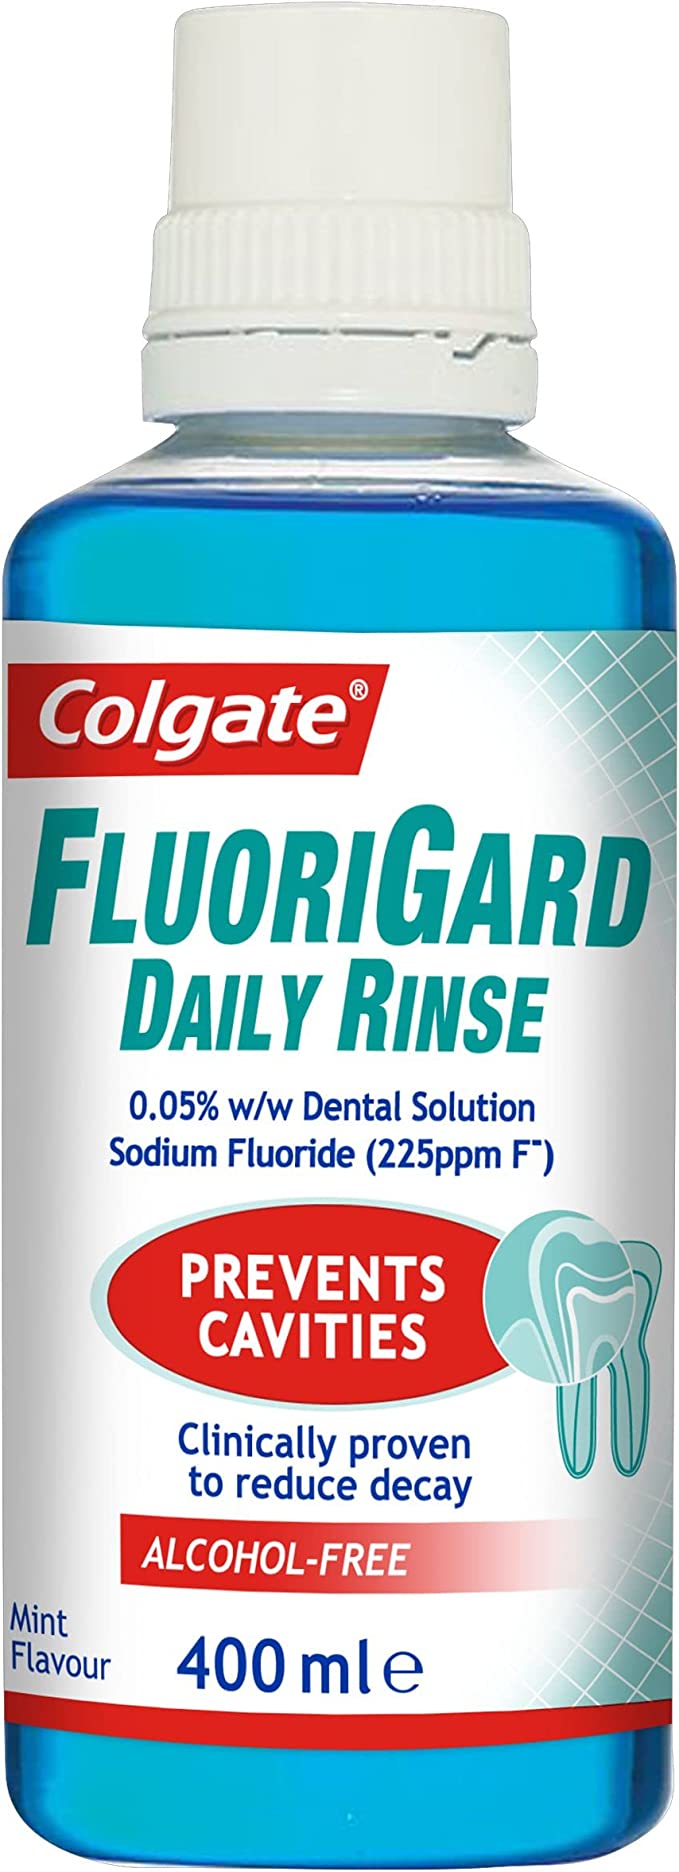 COLGATE Fluorigard Daily Rinse (Alcohol Free) Mouthwash 400 ml, Cavity Prevention Tooth Strengthening Mouthwash, Mint Flavour, Pack of 1, Light Blue